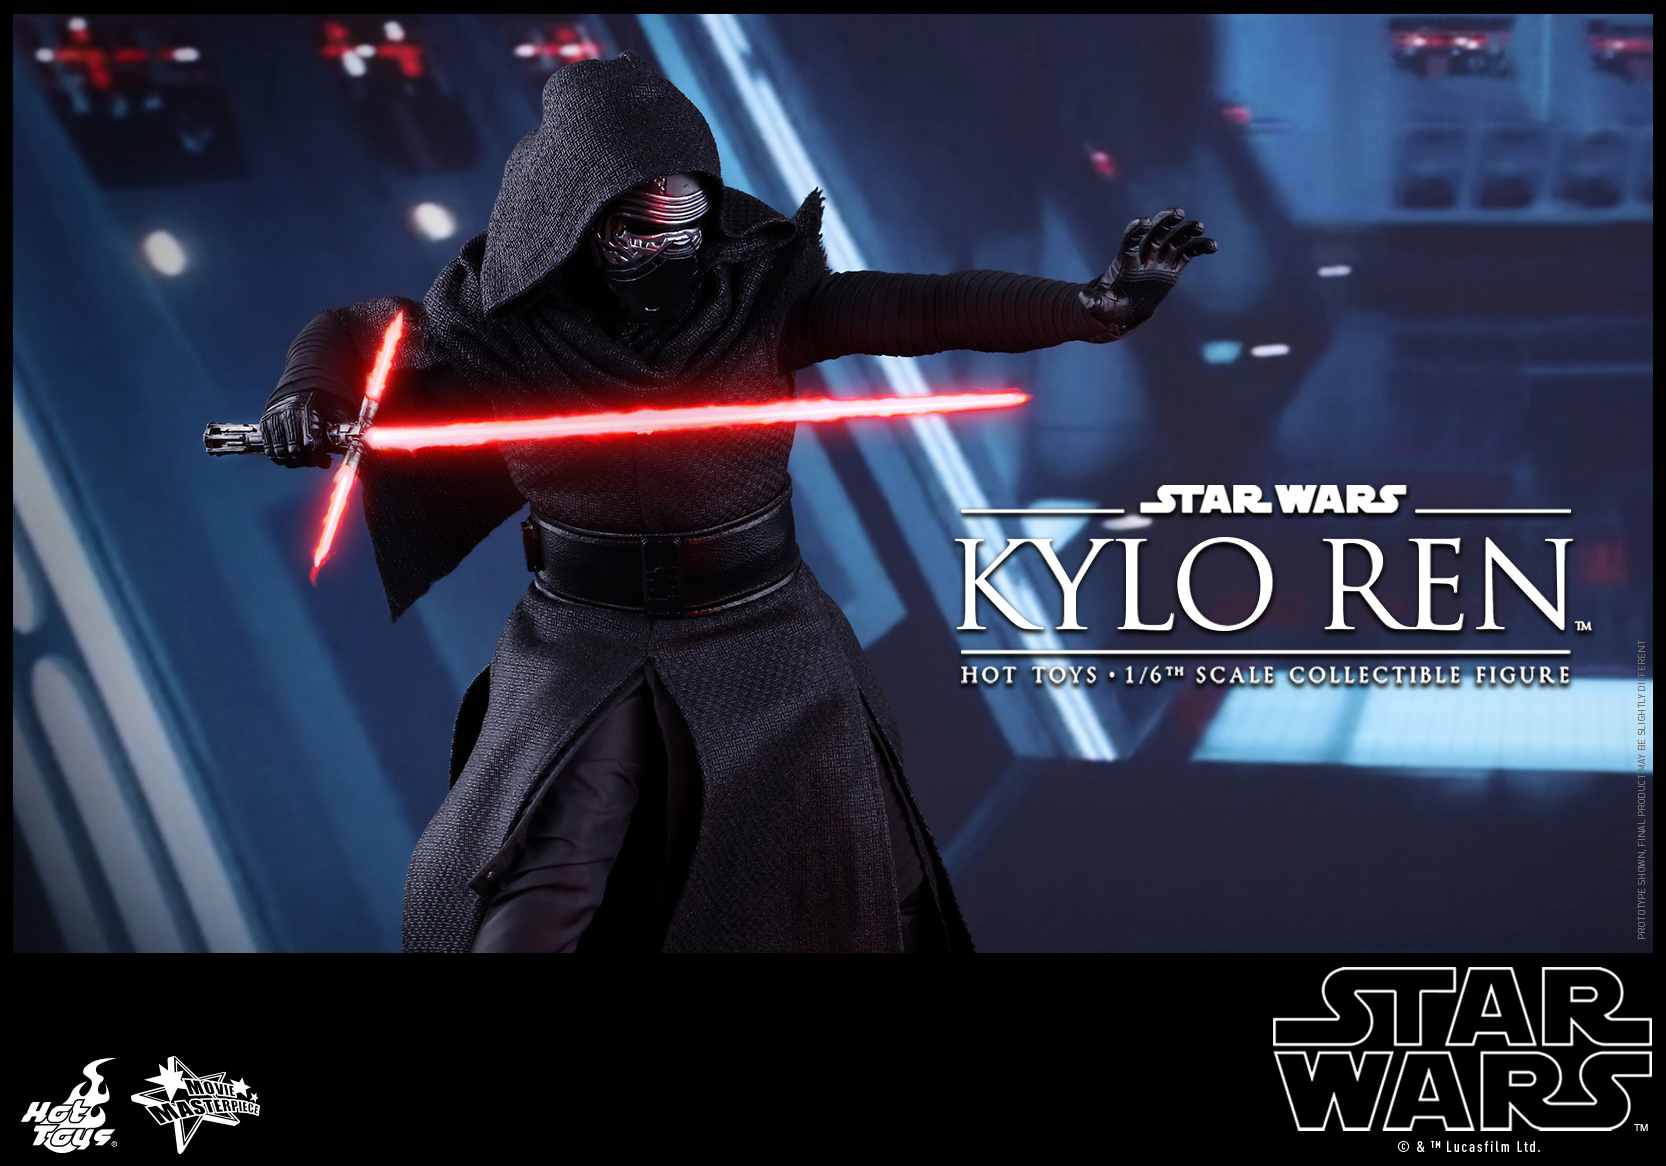 Hot Toys - Star Wars - The Force Awakens - Kylo Ren Collectible Figure